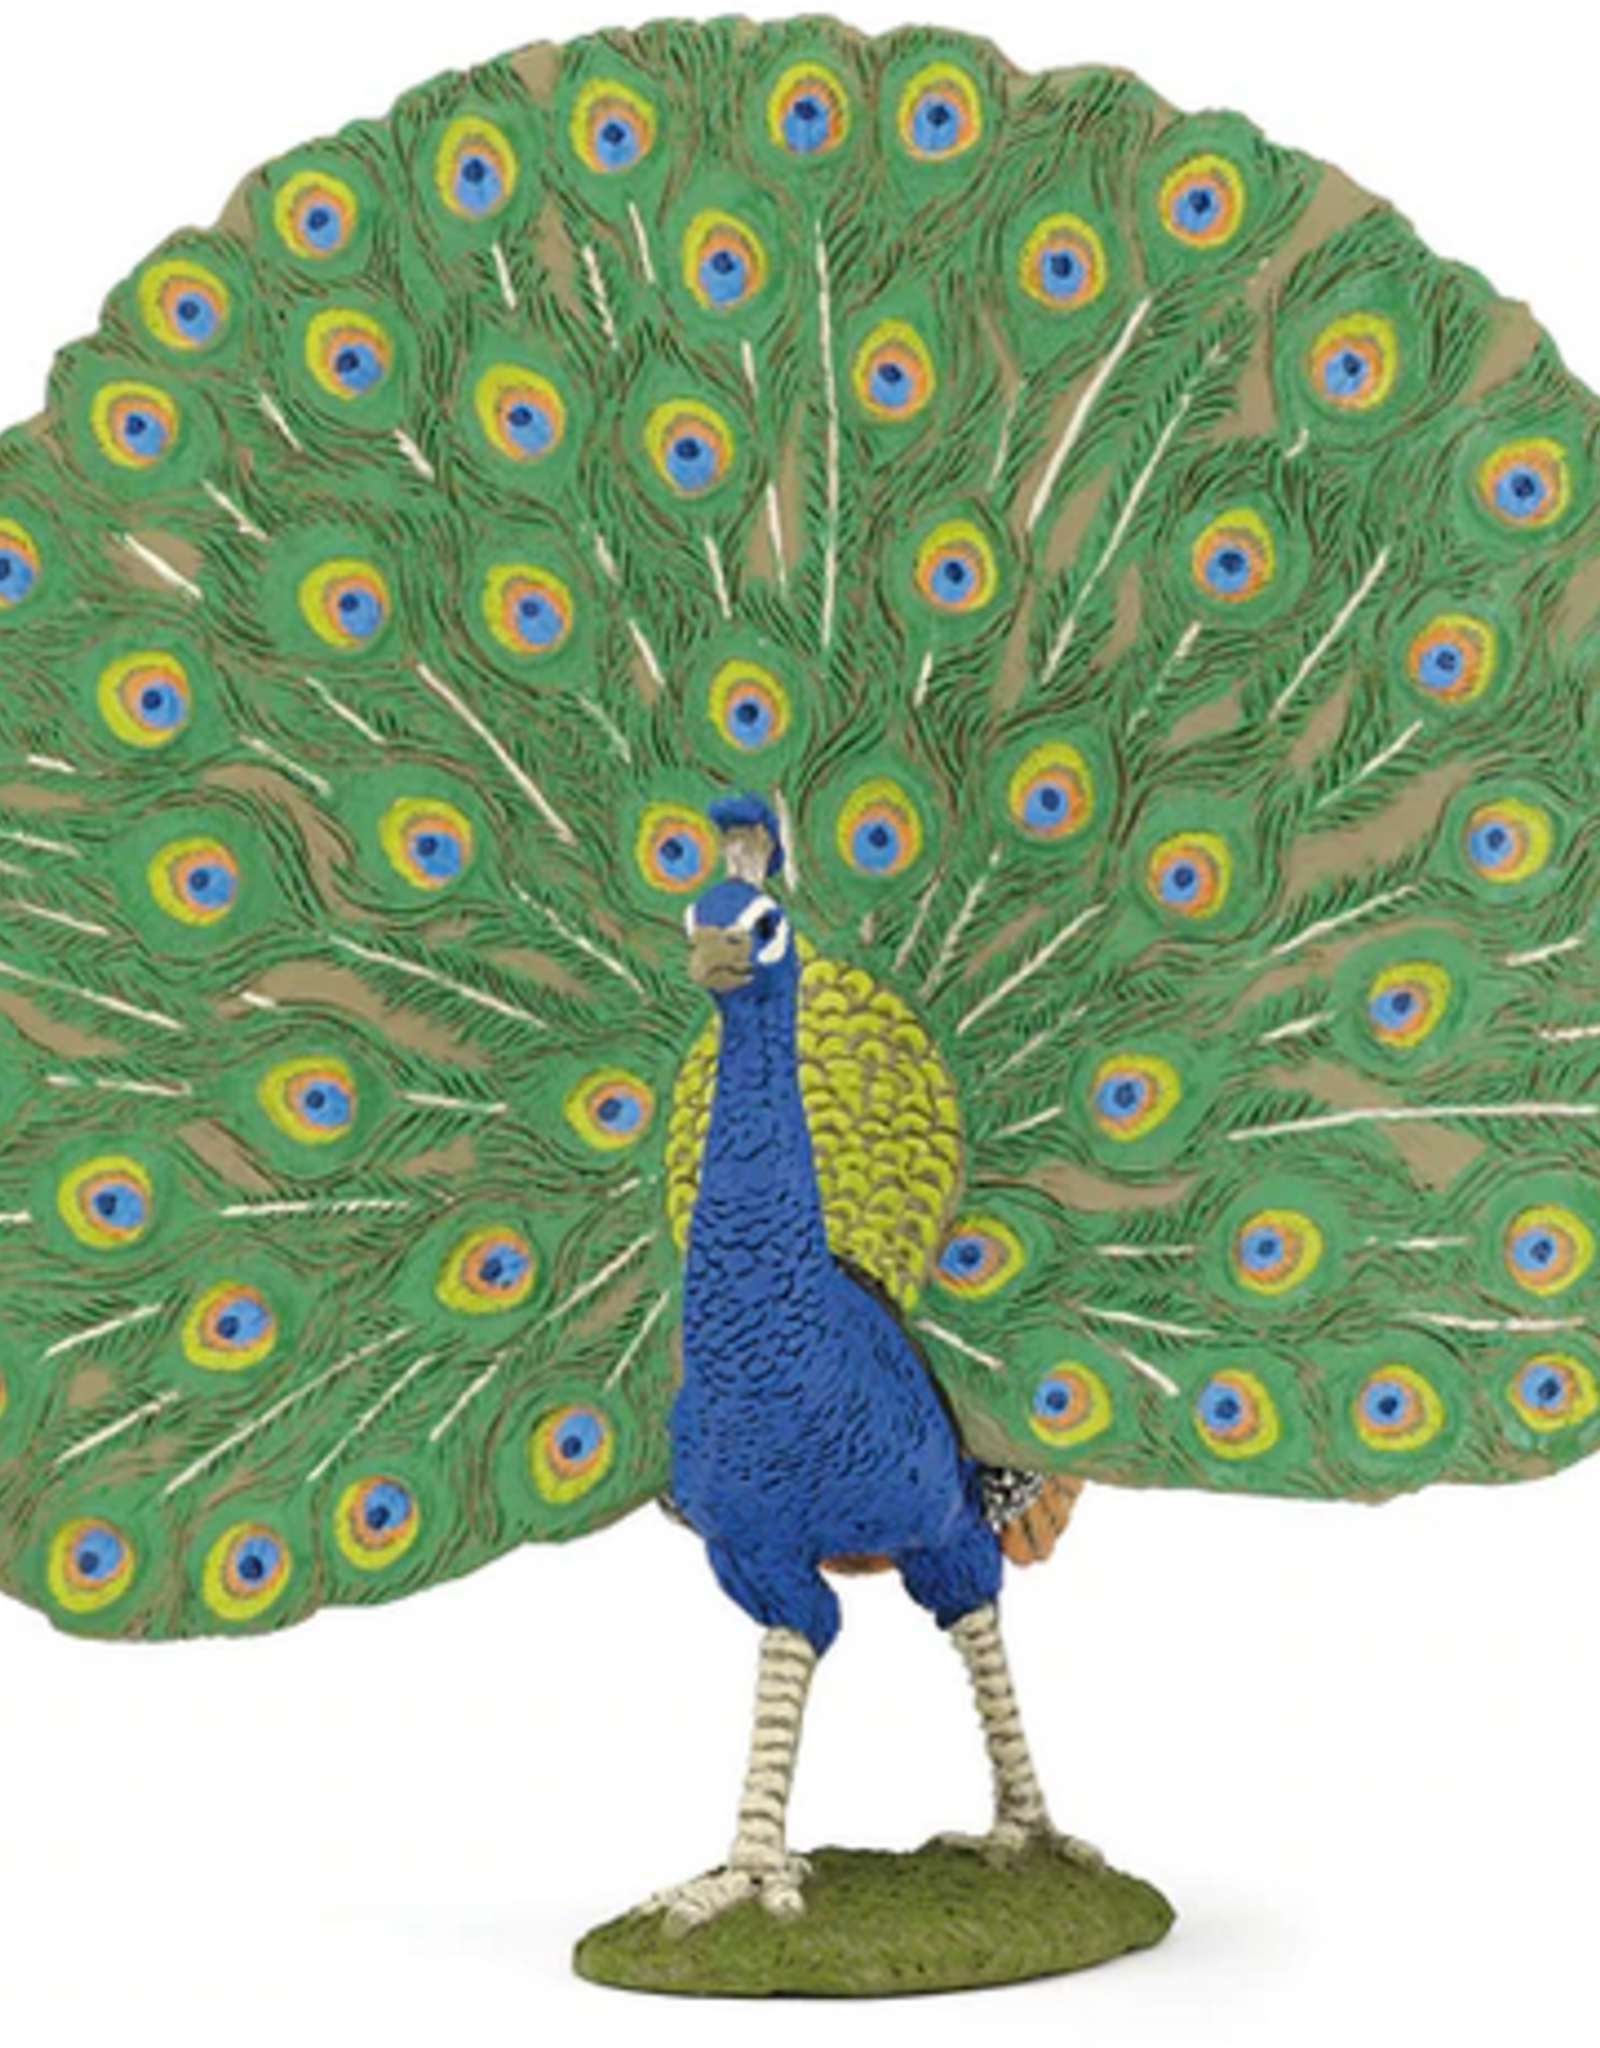 Hotaling PAPO: Peacock